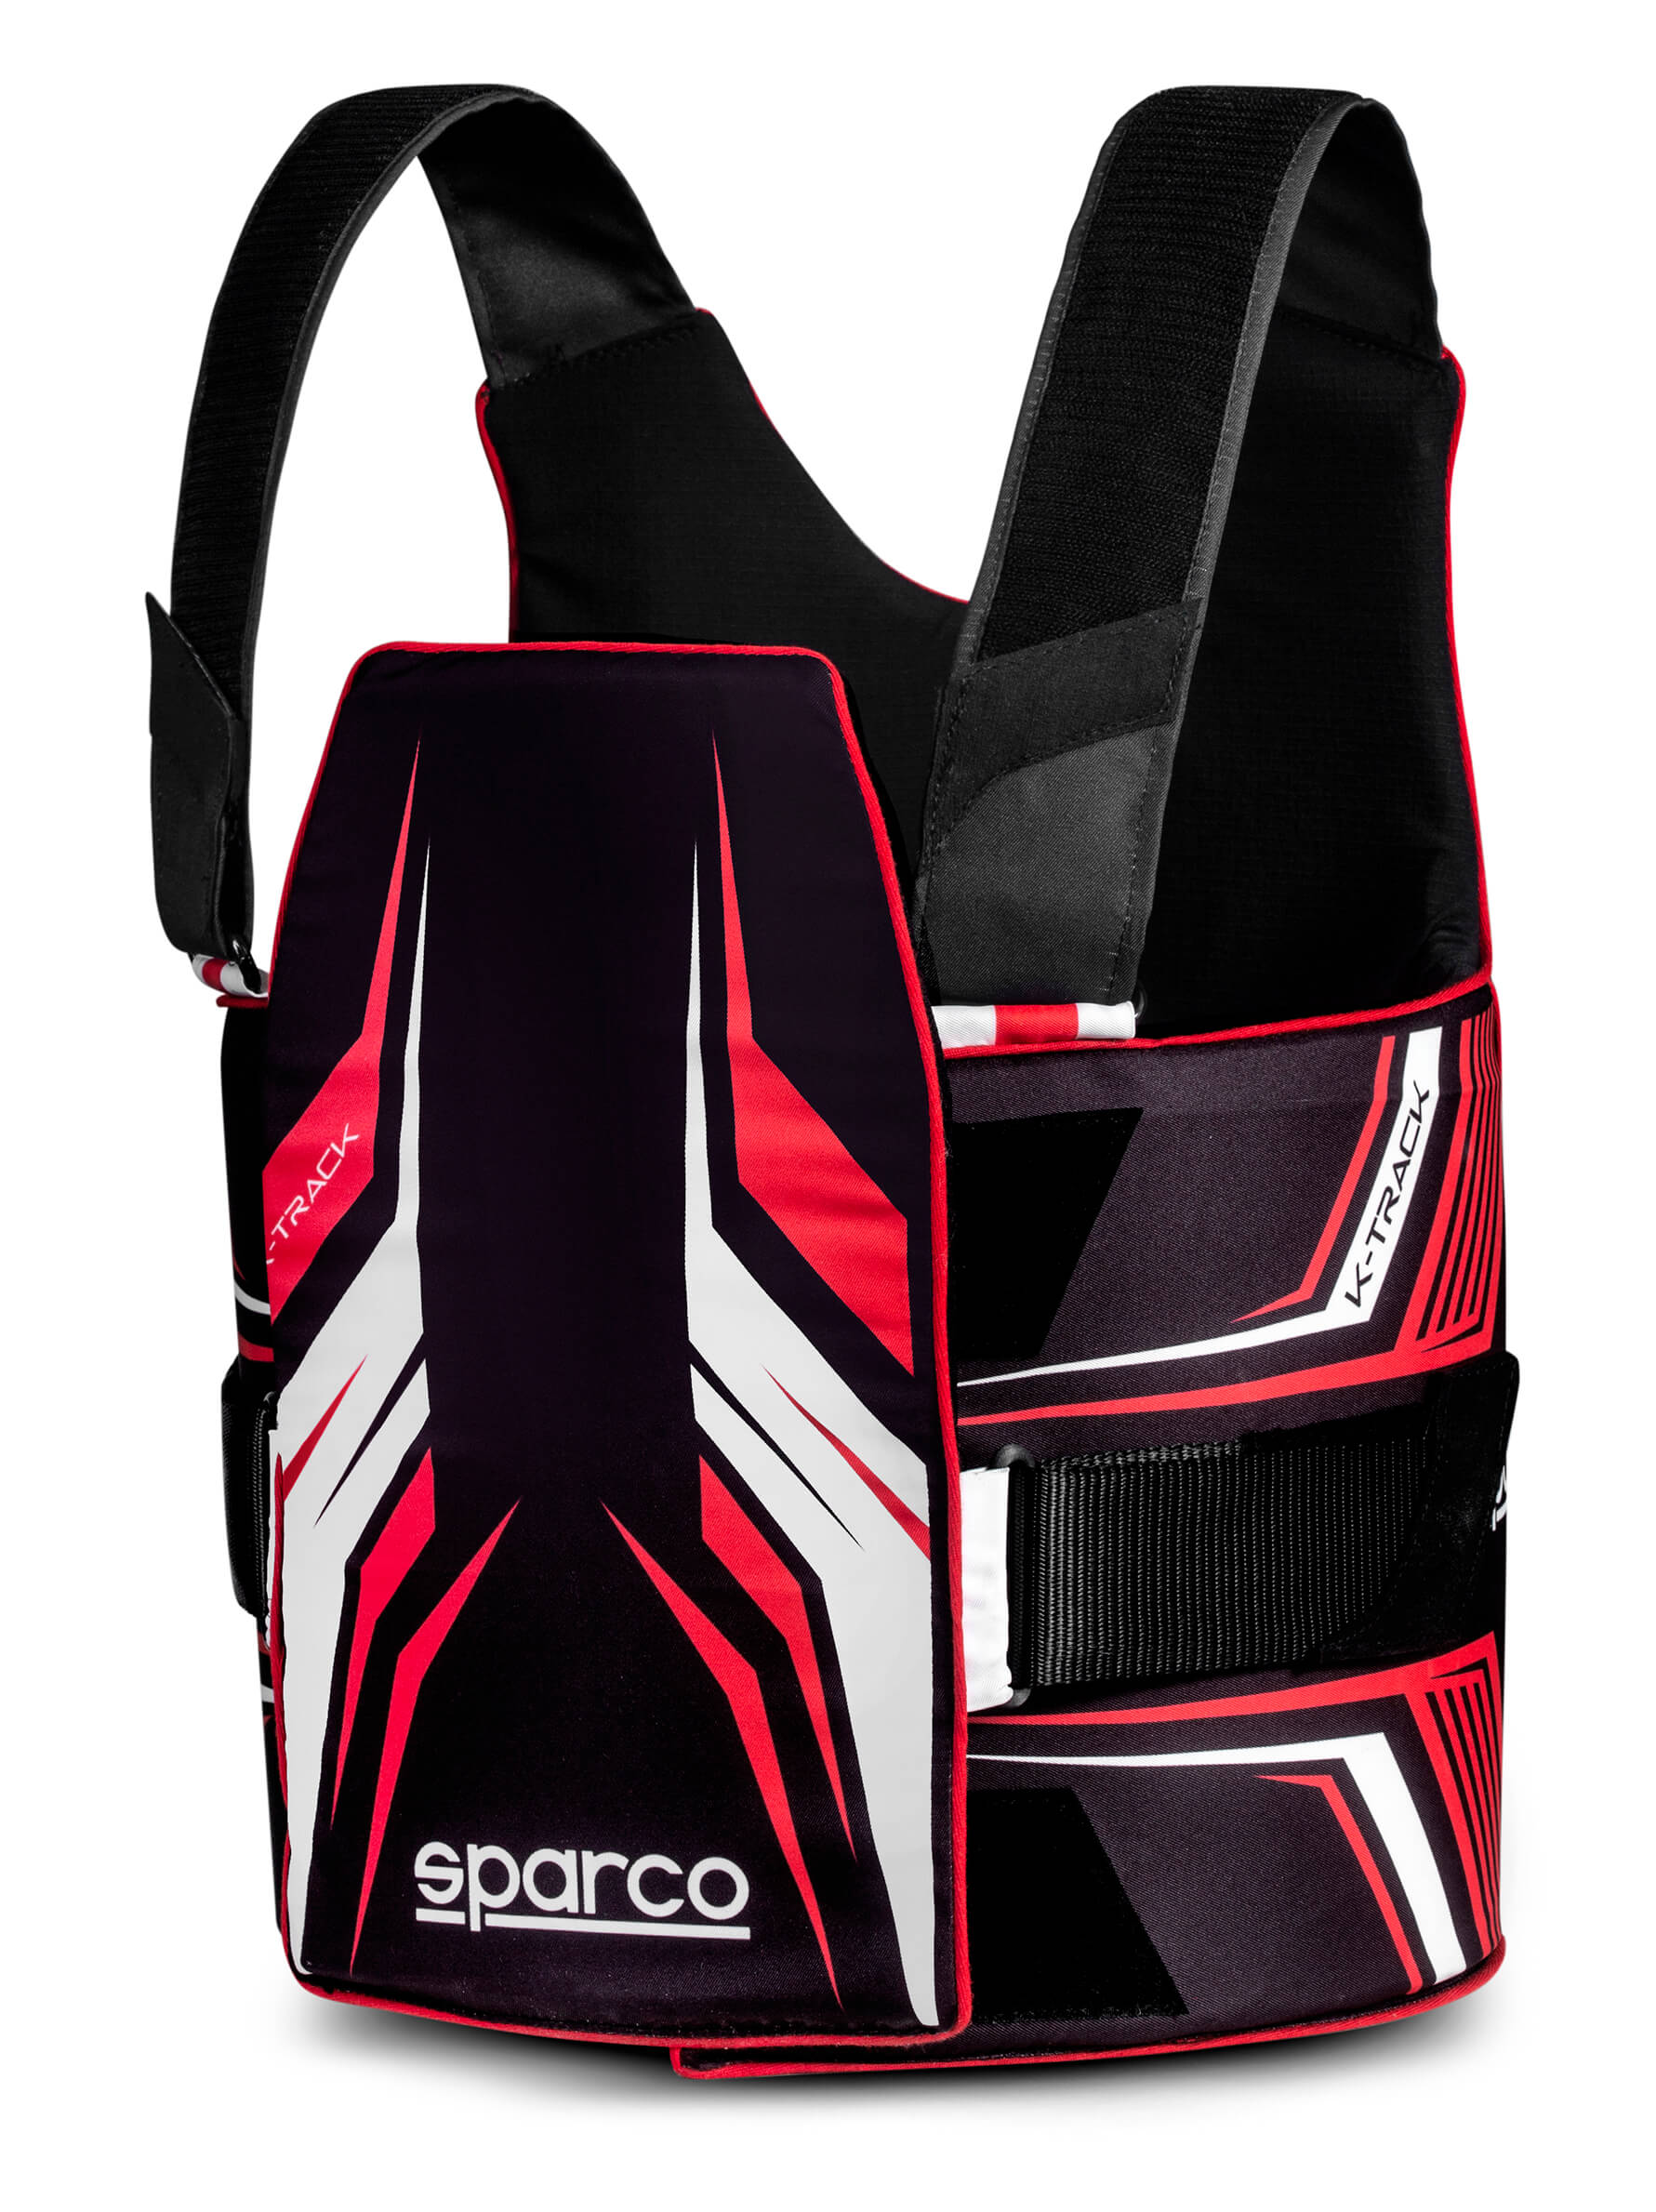 SPARCO 002406KNRRS2S K-TRACK Karting Rib Protector, FIA 8870-2018, black/red, size S Photo-0 